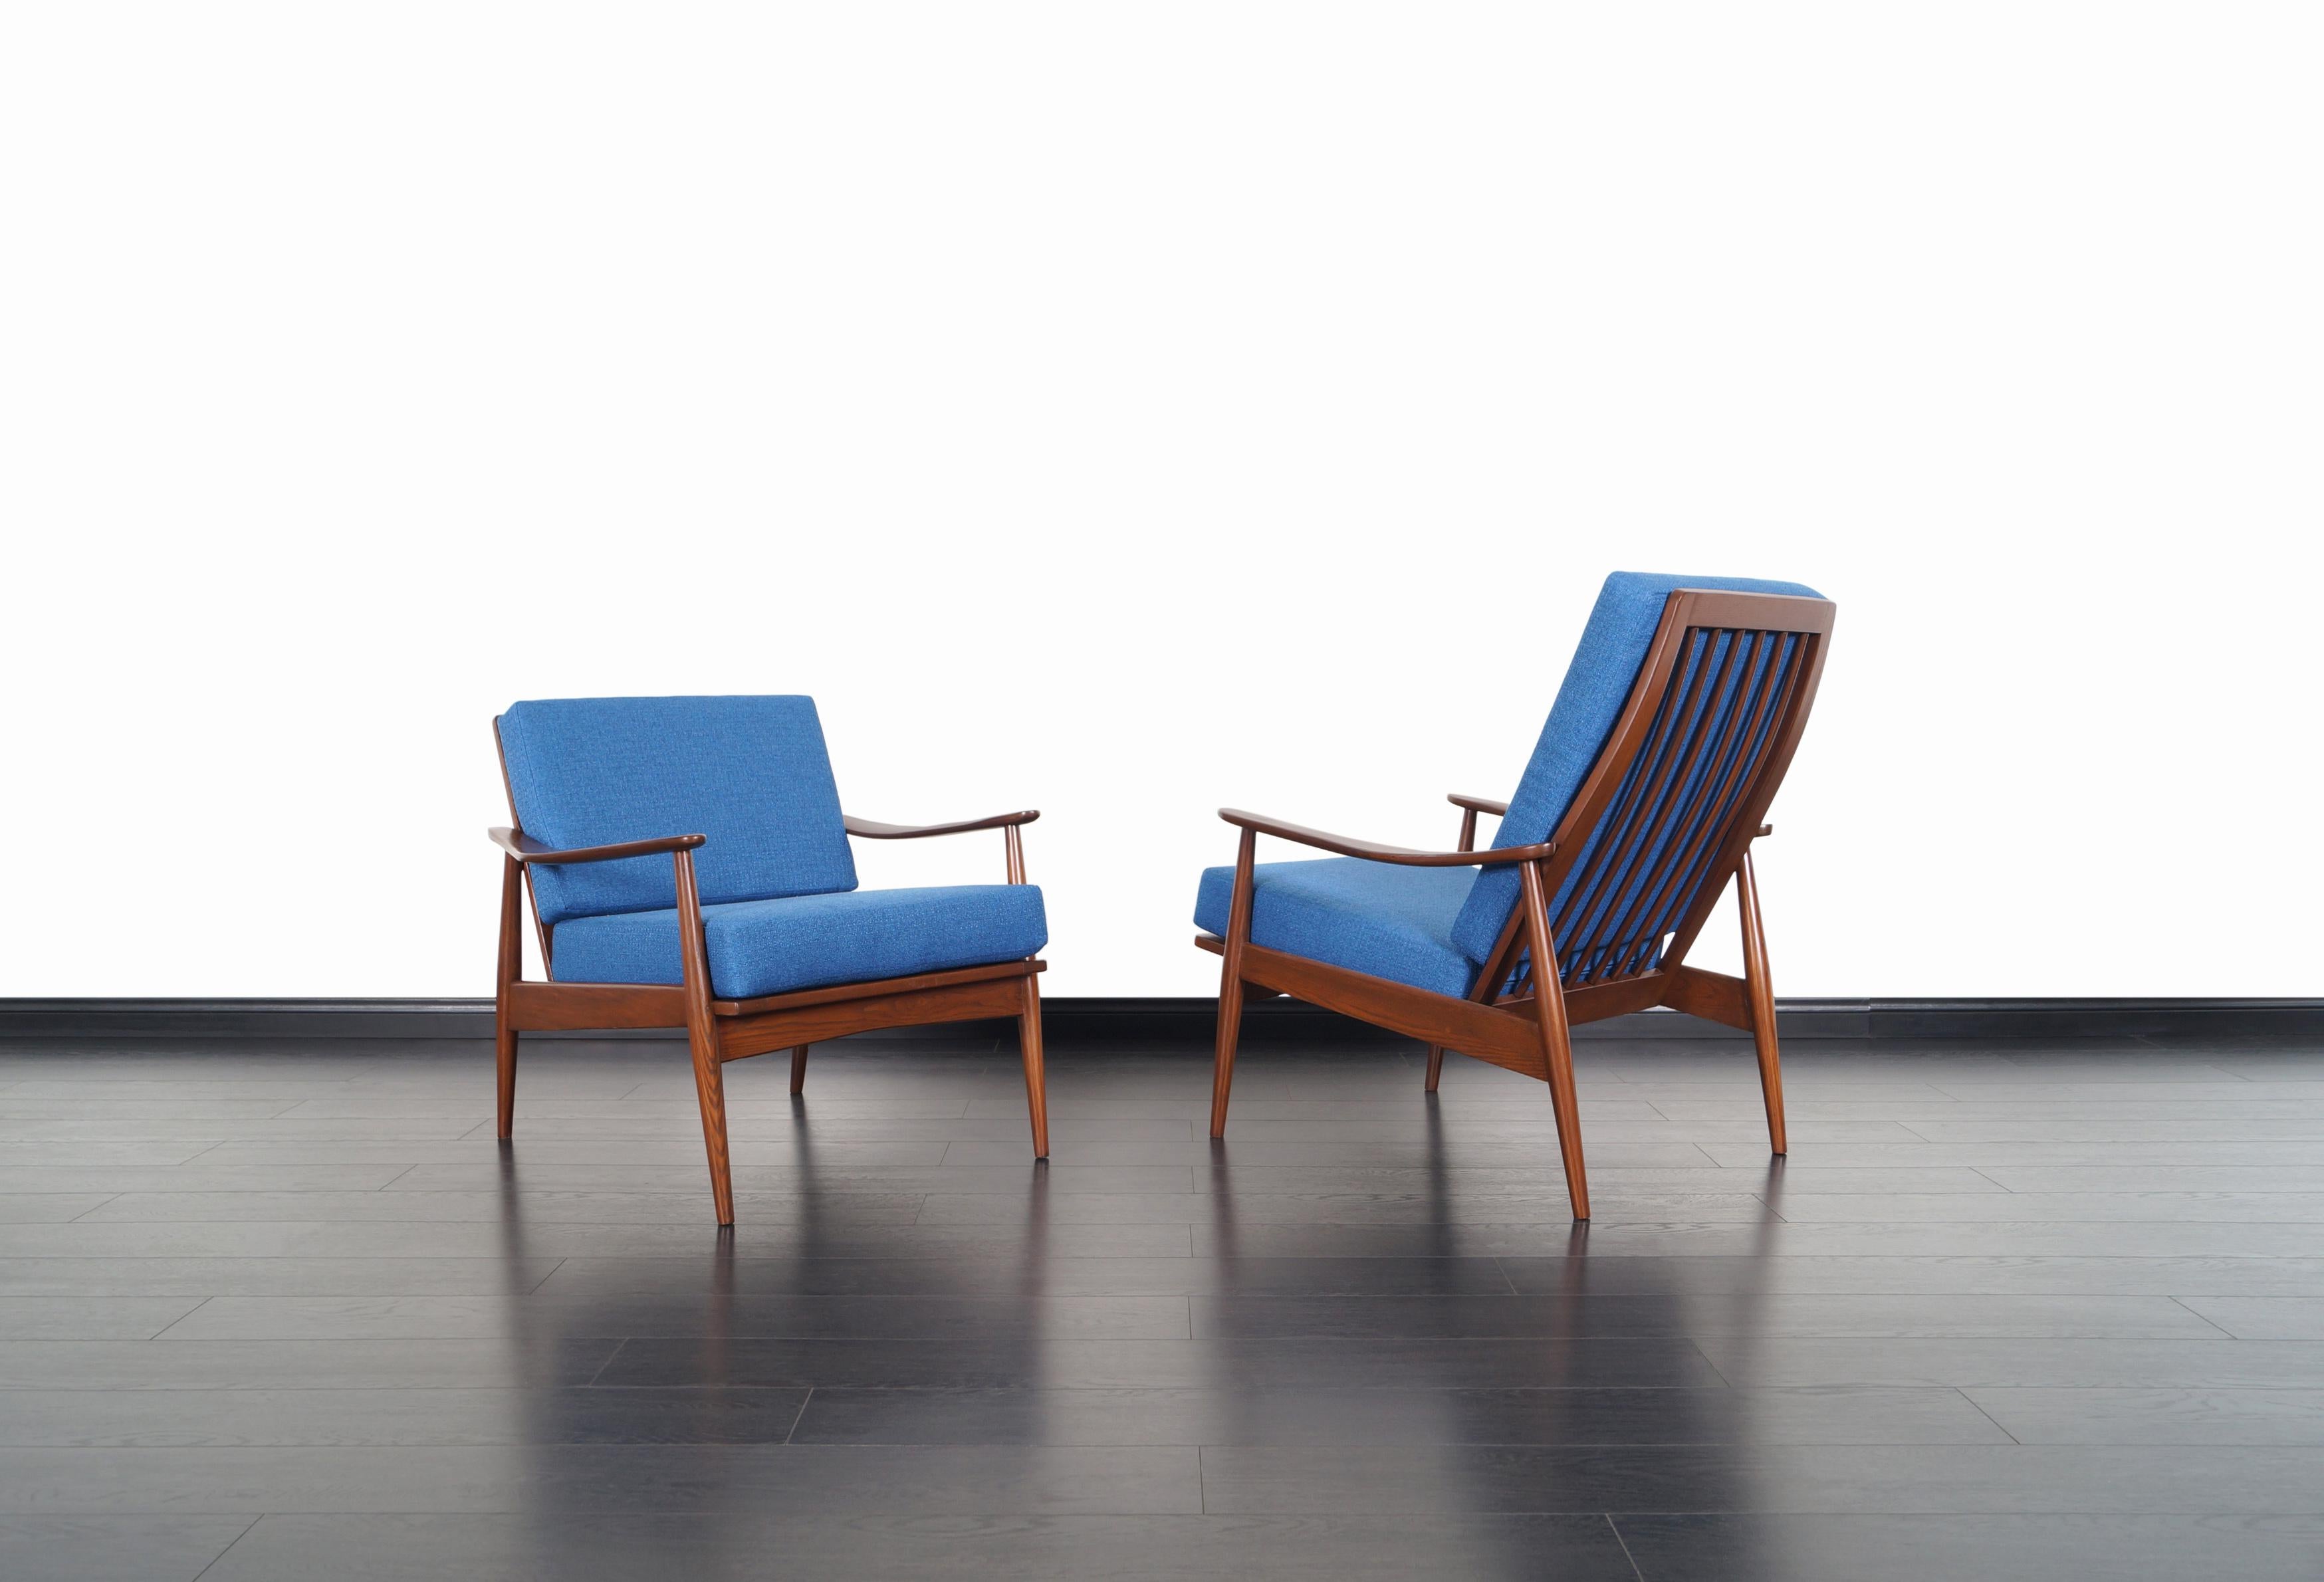 Fabulous pair of Mid-Century Modern lounge chairs, manufactured in the United States, circa 1950s. These chairs features a solid walnut stained oak frames with sculptural armrests and slatted backrests. The perfectly symmetrical proportions and